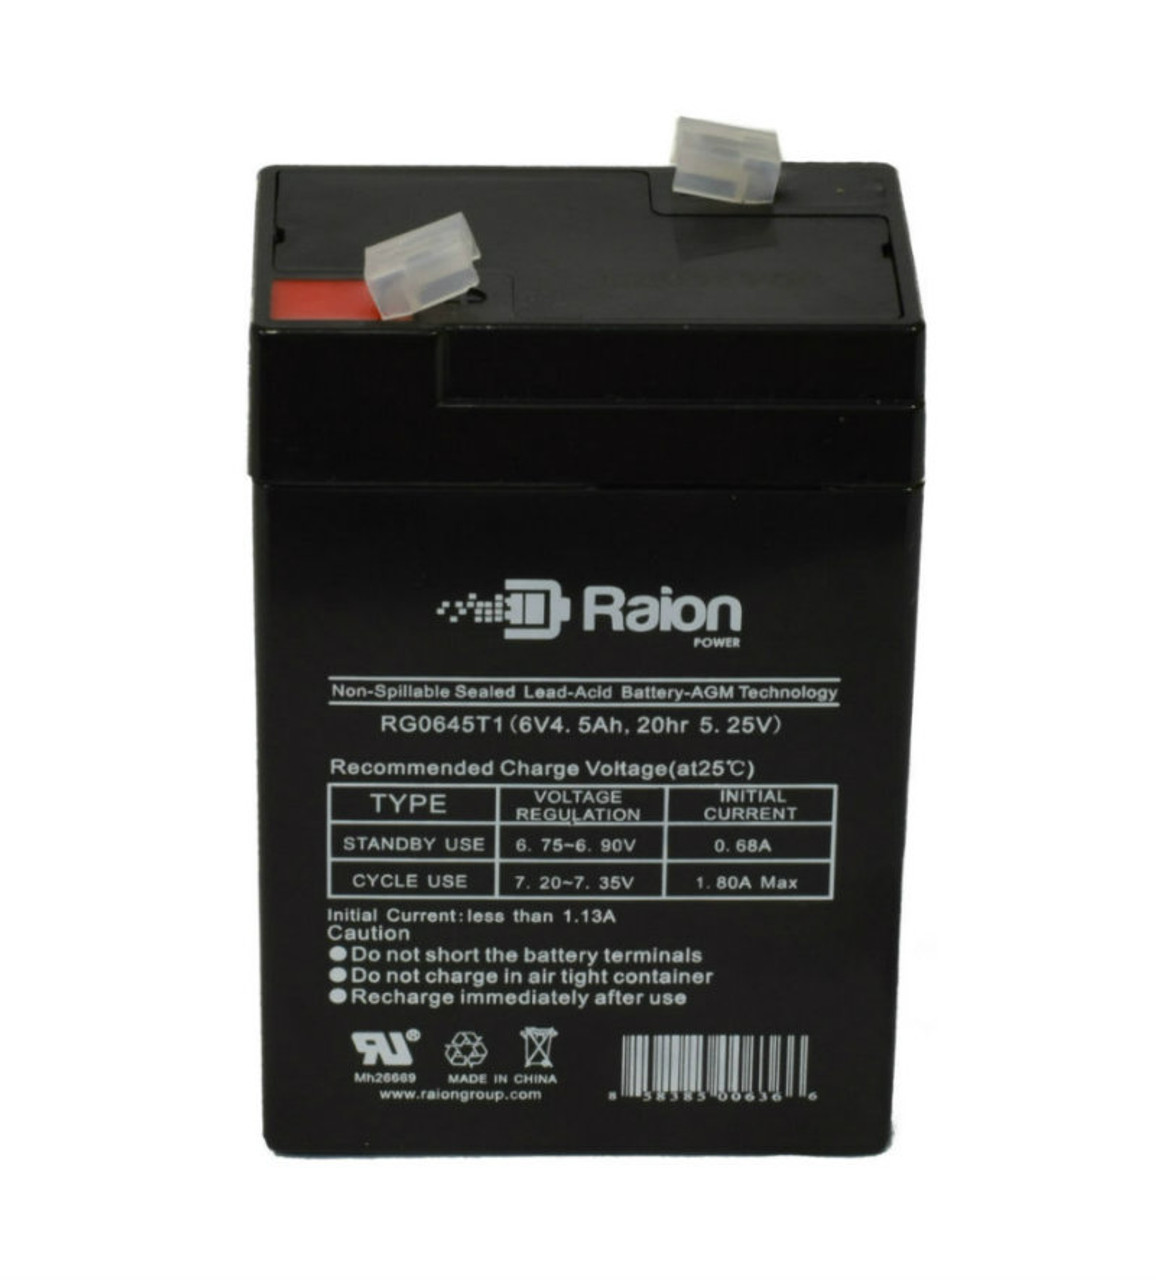 Raion Power RG0645T1 Replacement Battery Cartridge for Abbott Laboratories Life Care 1000